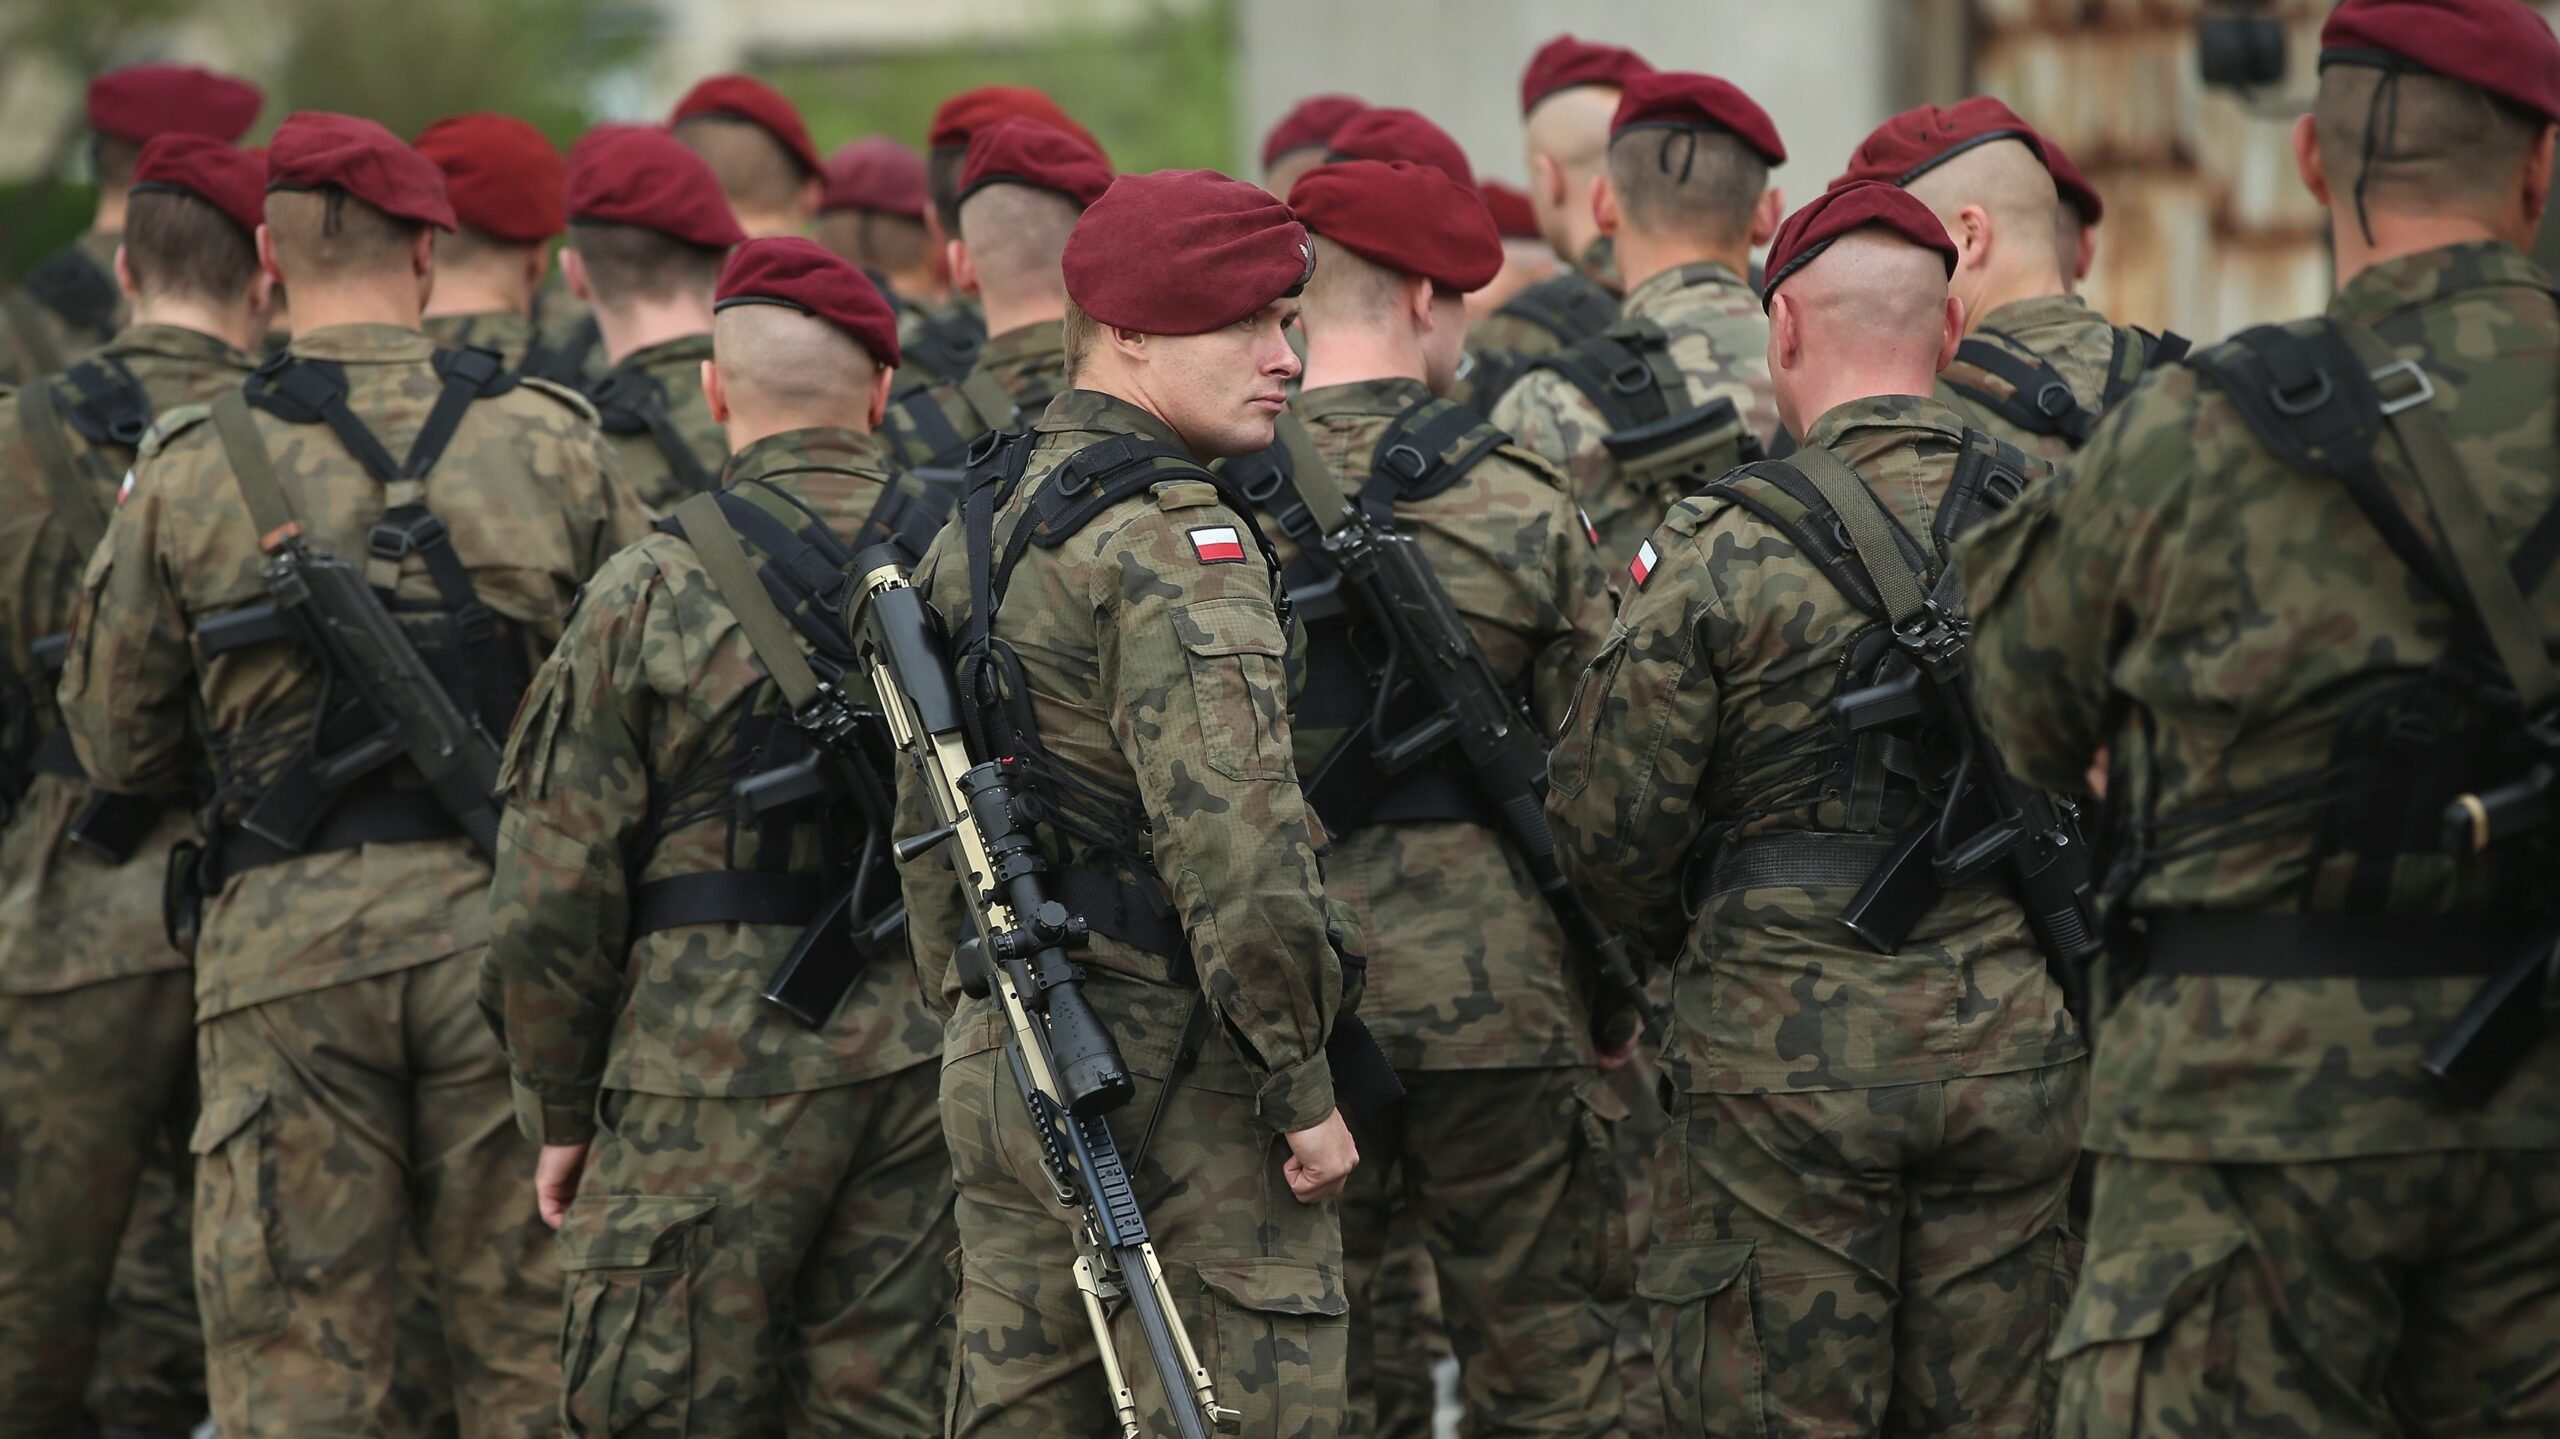 What weapons will Poland send to Ukraine – and is an alliance next?